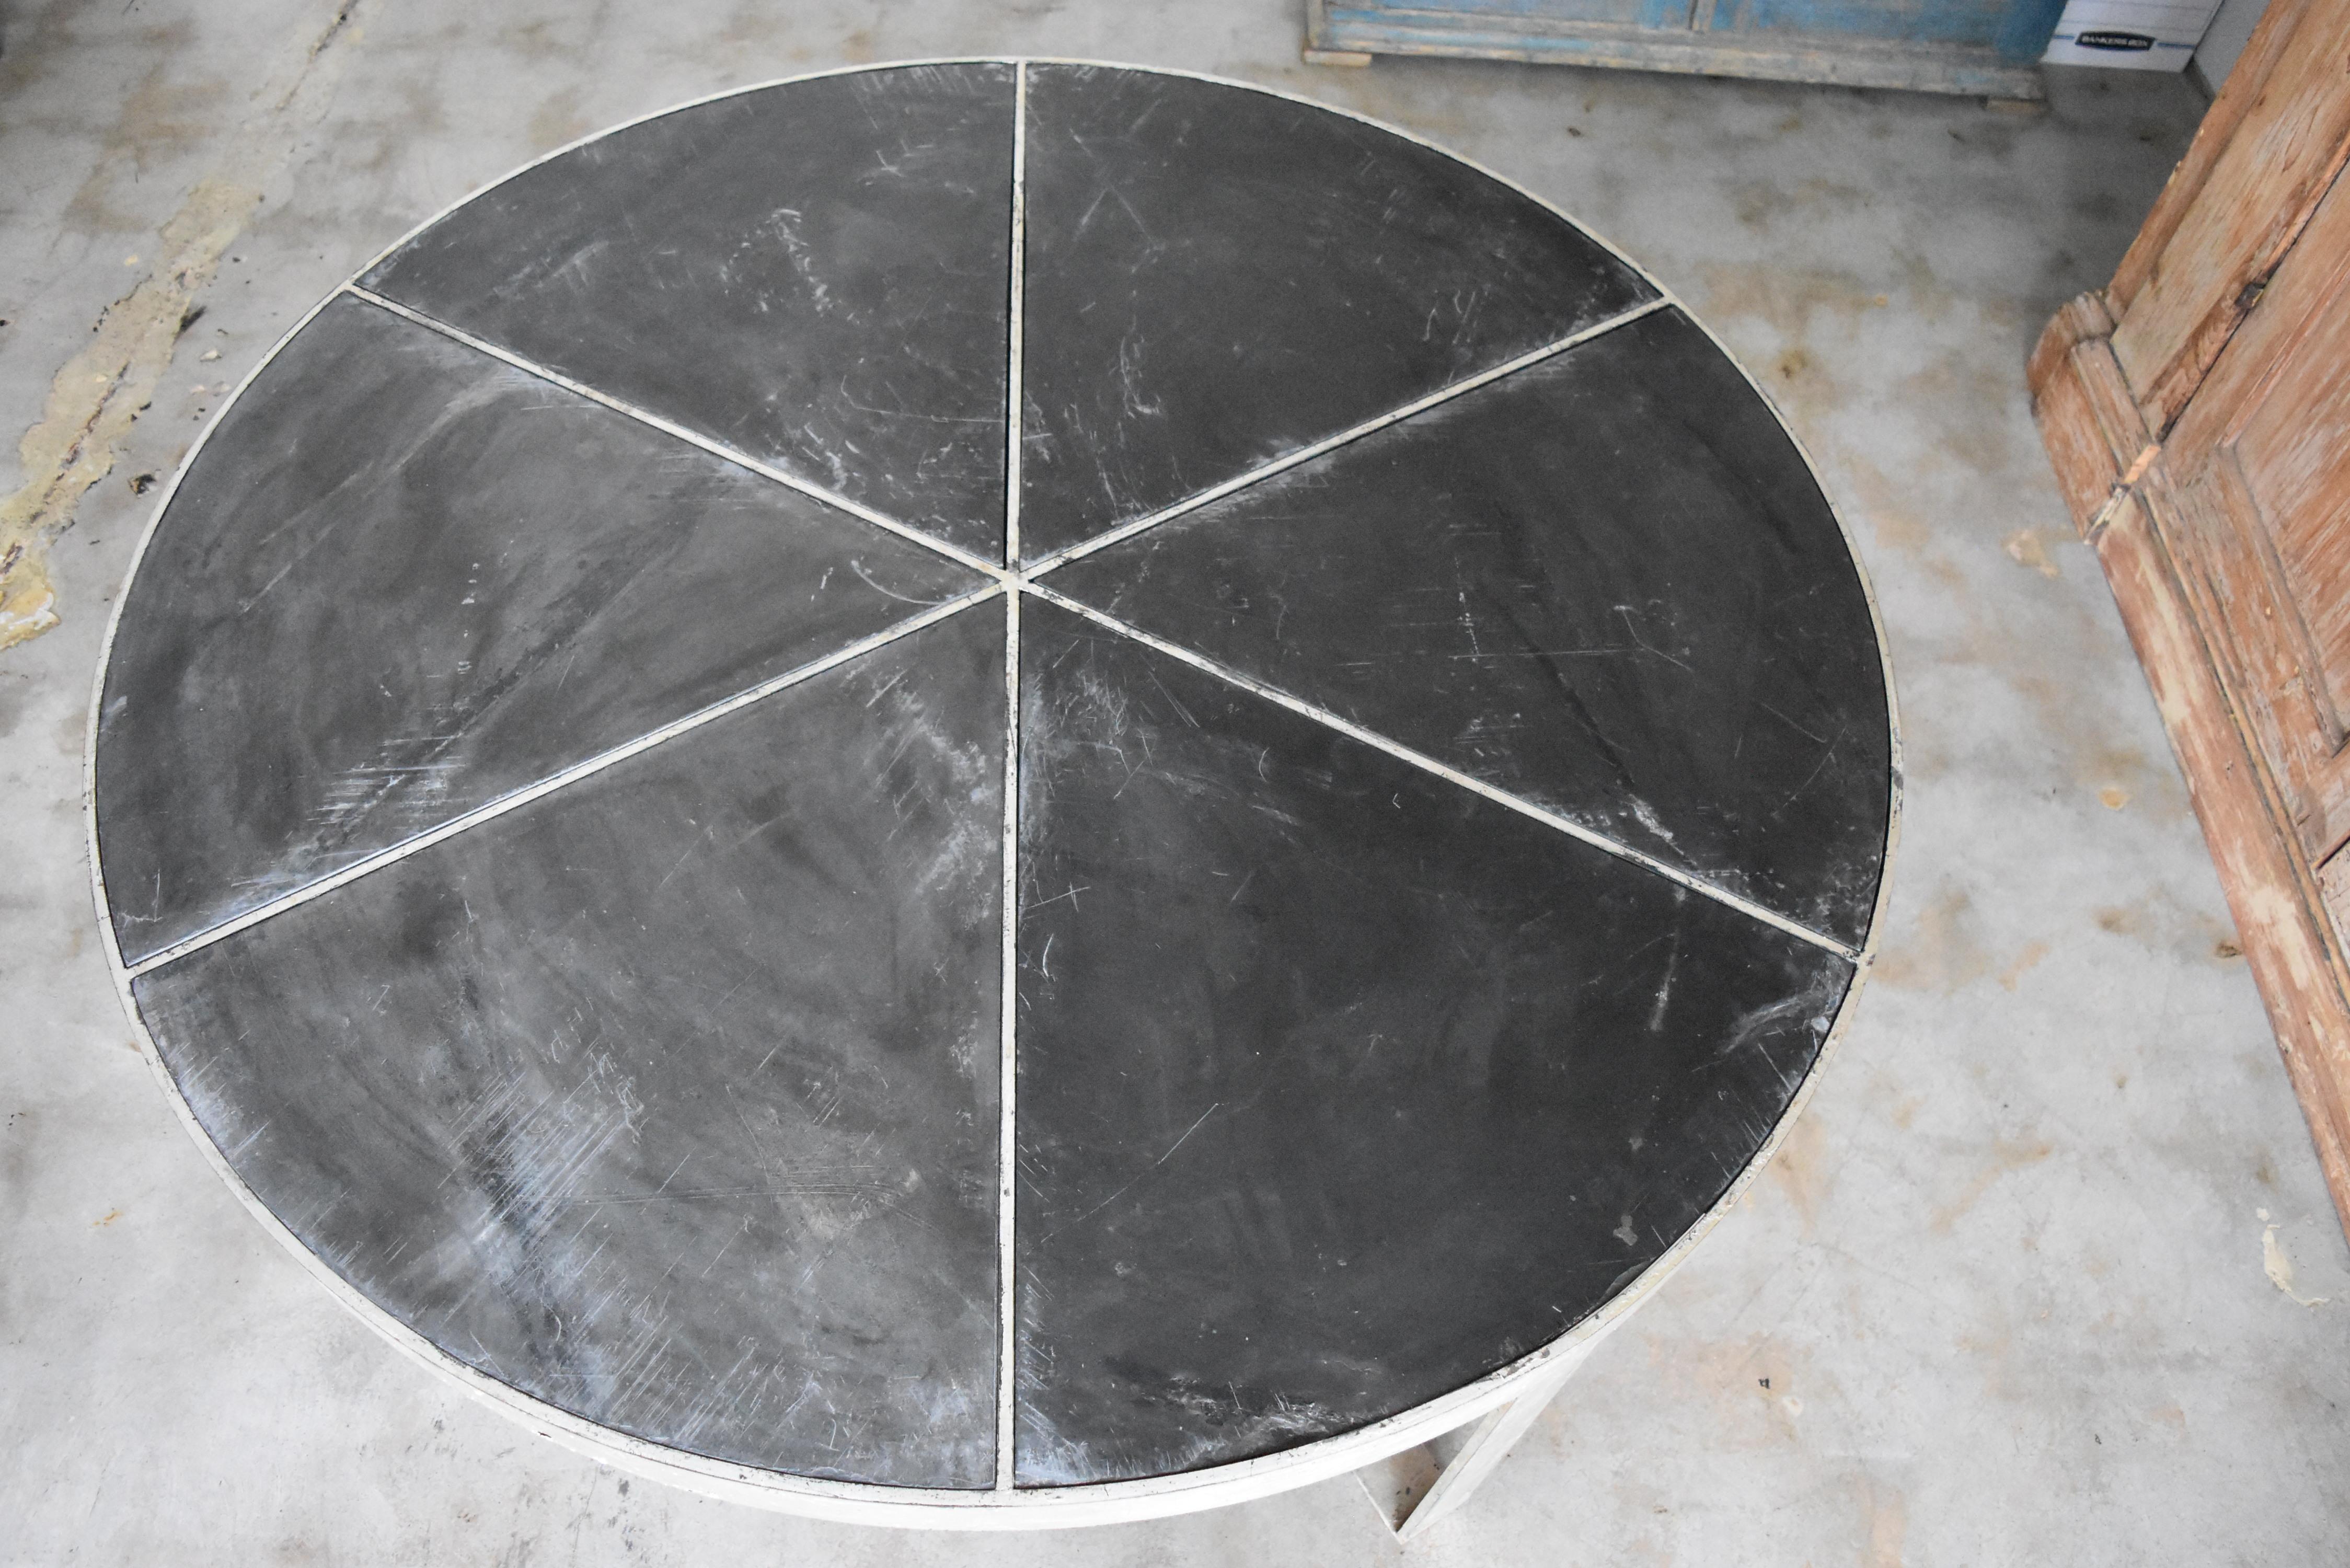 Our very own design round coffee table with silver overlay and inset black slate. The slate pie pieces come out for transport. This is very heavy gage iron and over 100lbs. It's quite a statement piece. We also do custom sizes.